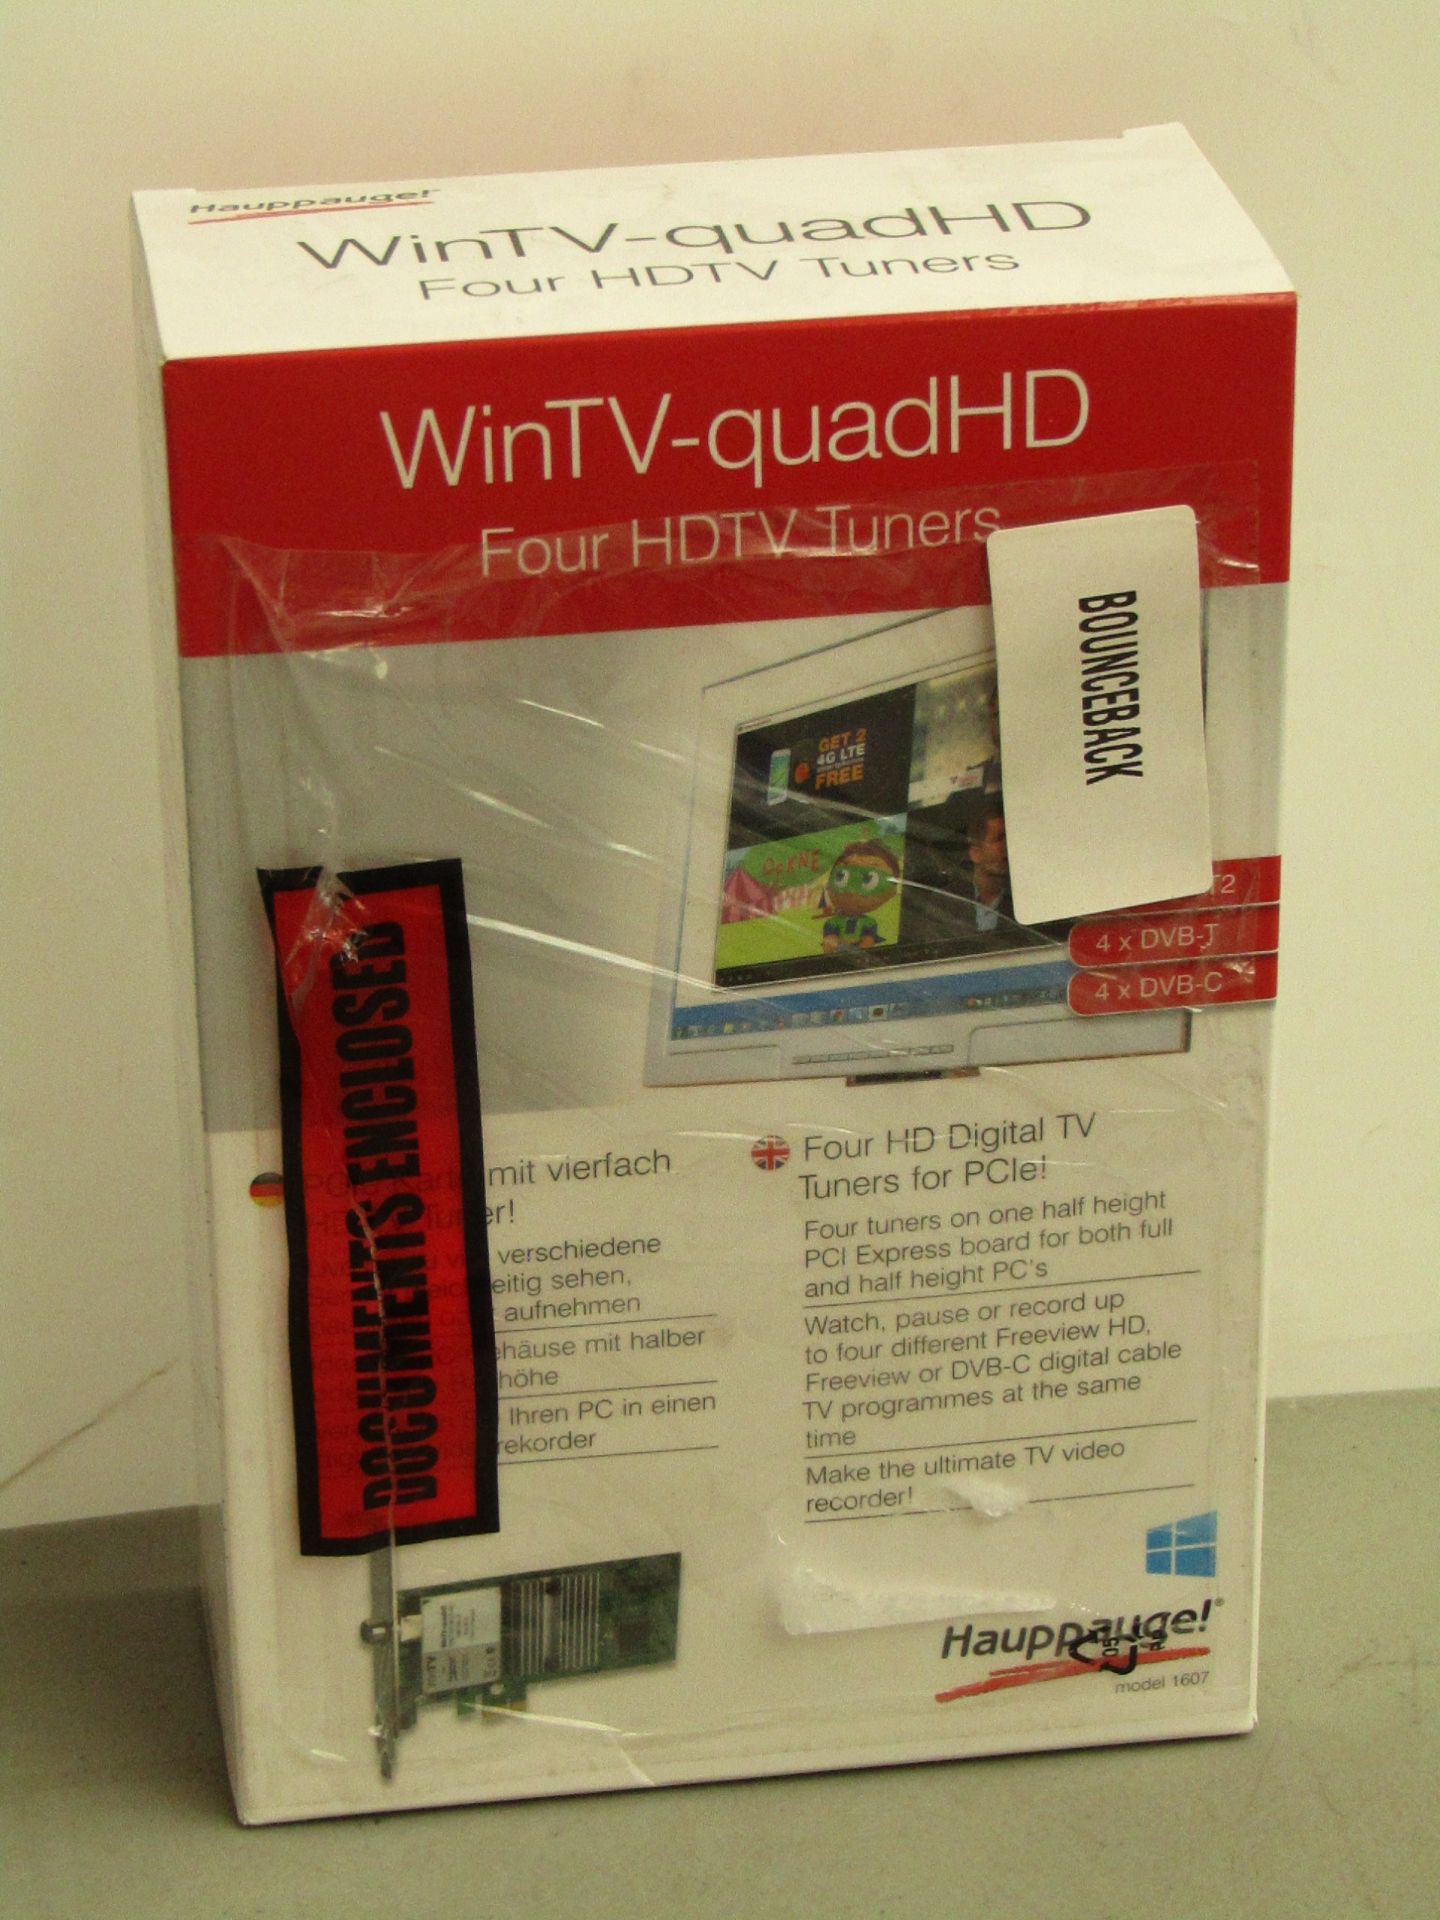 HAUPPAUGE WinTV-quadHD TV Receivers. Unchecked & boxed.